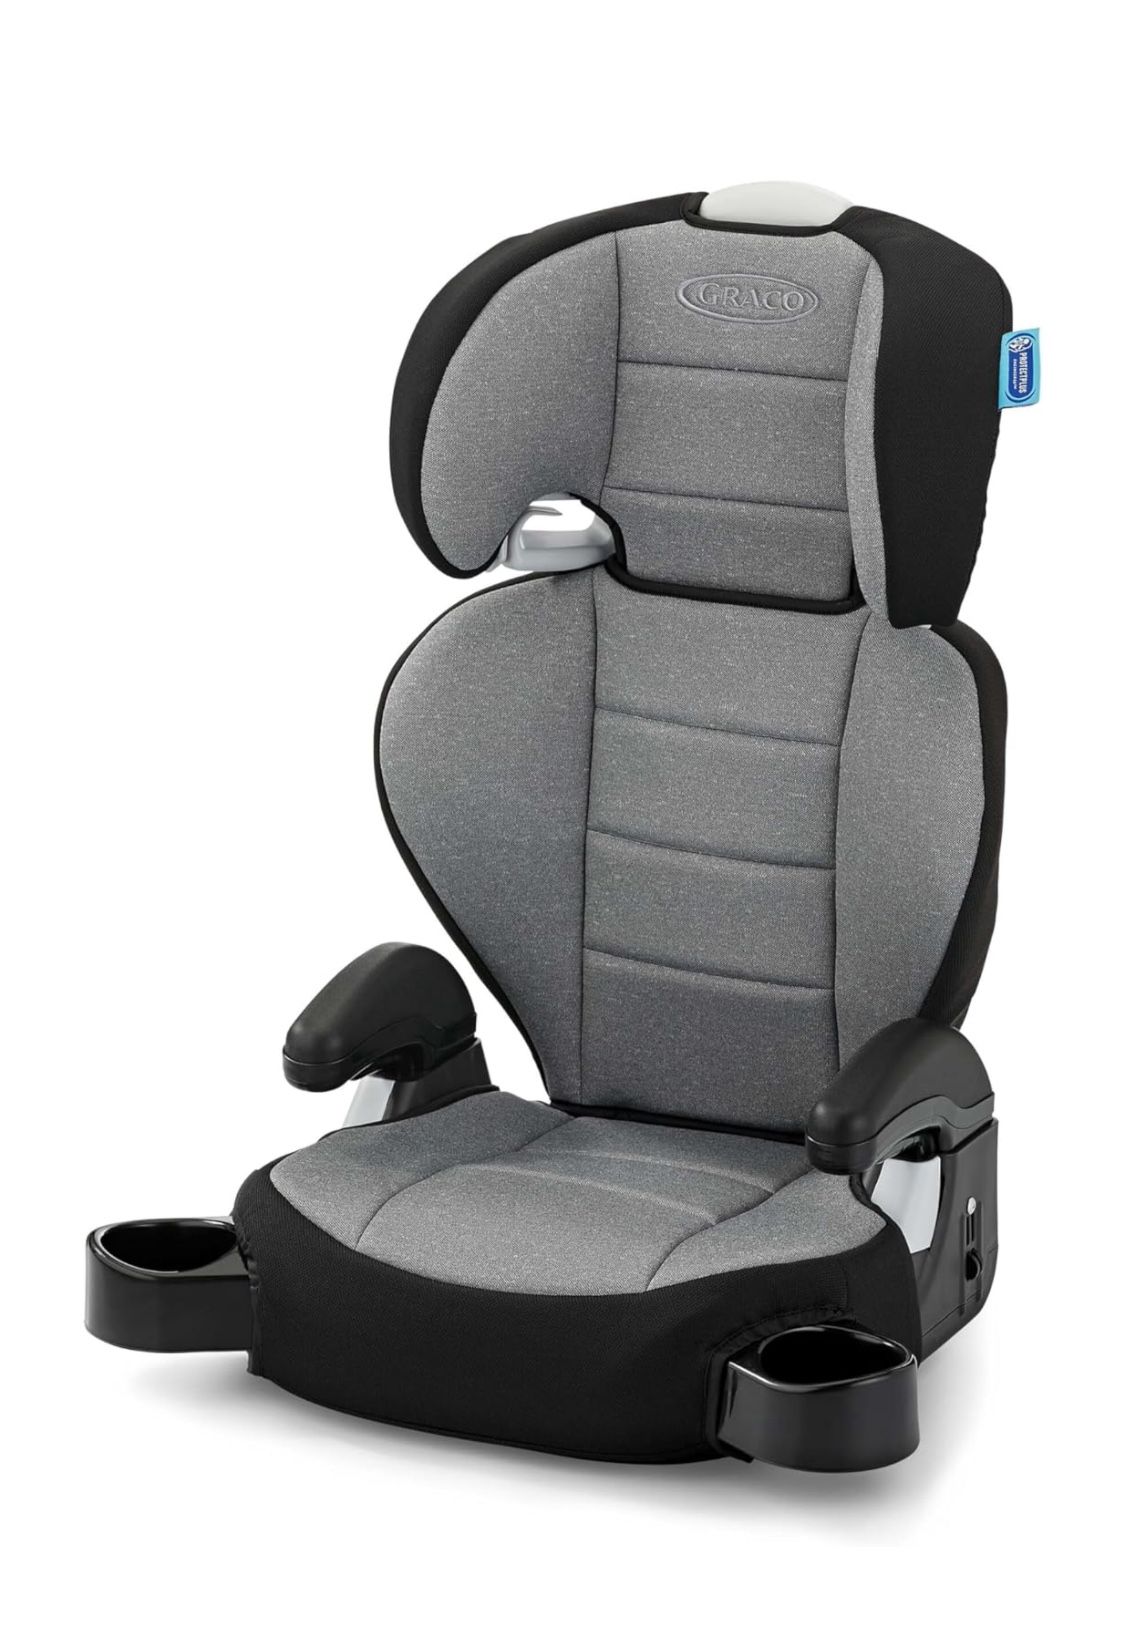 Graco TurboBooster 2.0 Highback Booster Car Seat